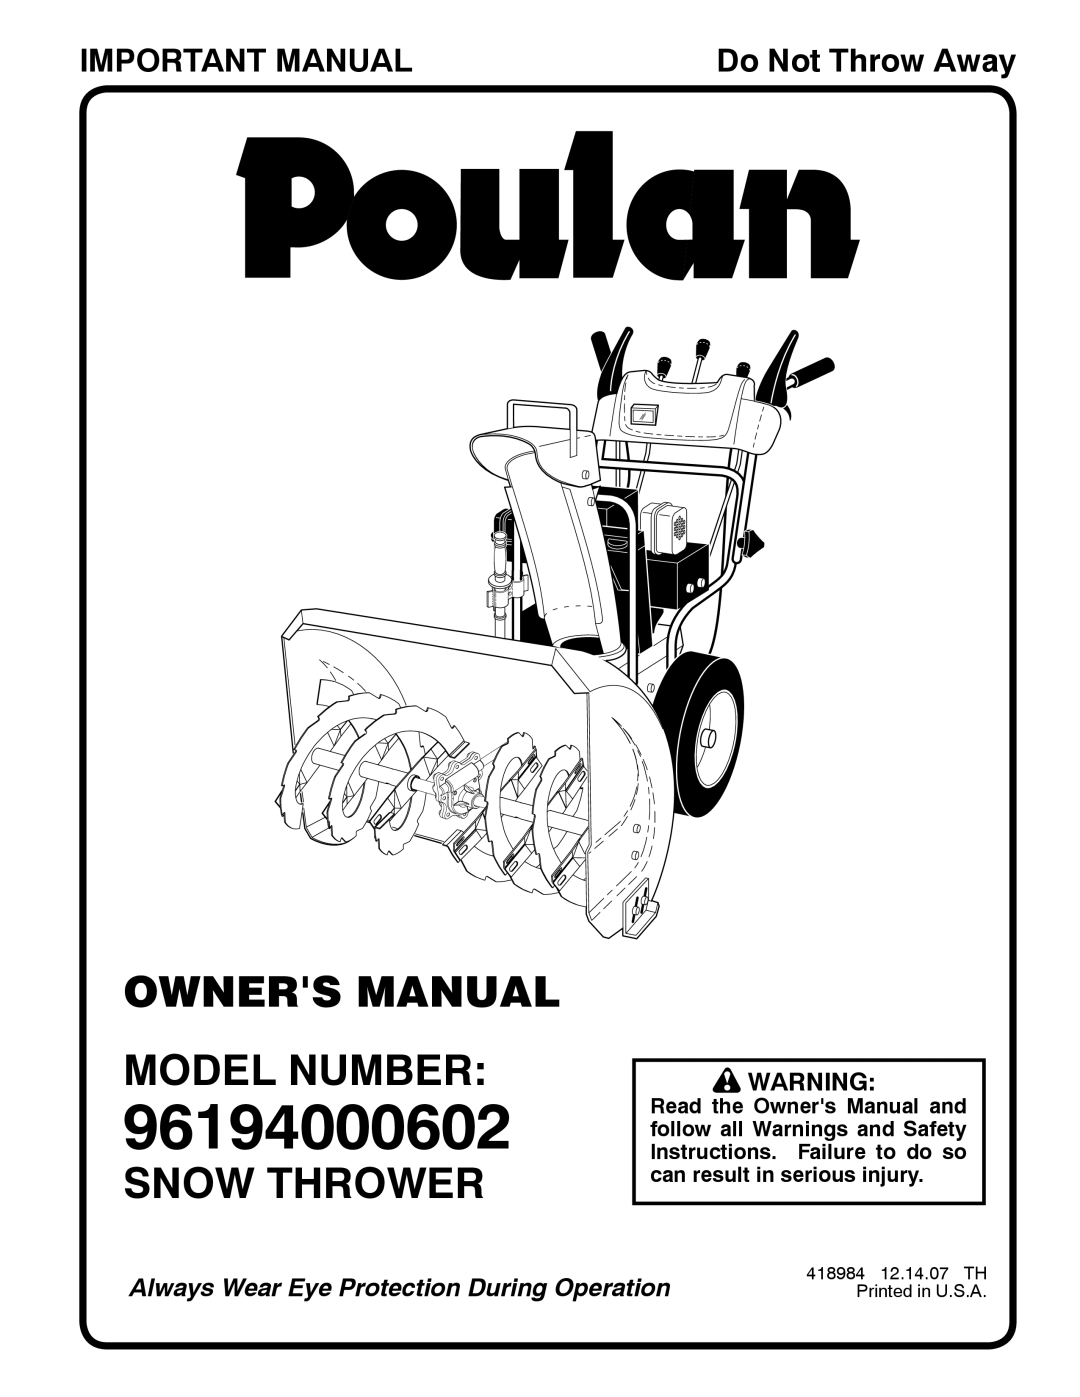 Poulan 96194000602, 418984 owner manual Owners Manual Model Number, Snow Thrower, Important Manual, Do Not Throw Away 